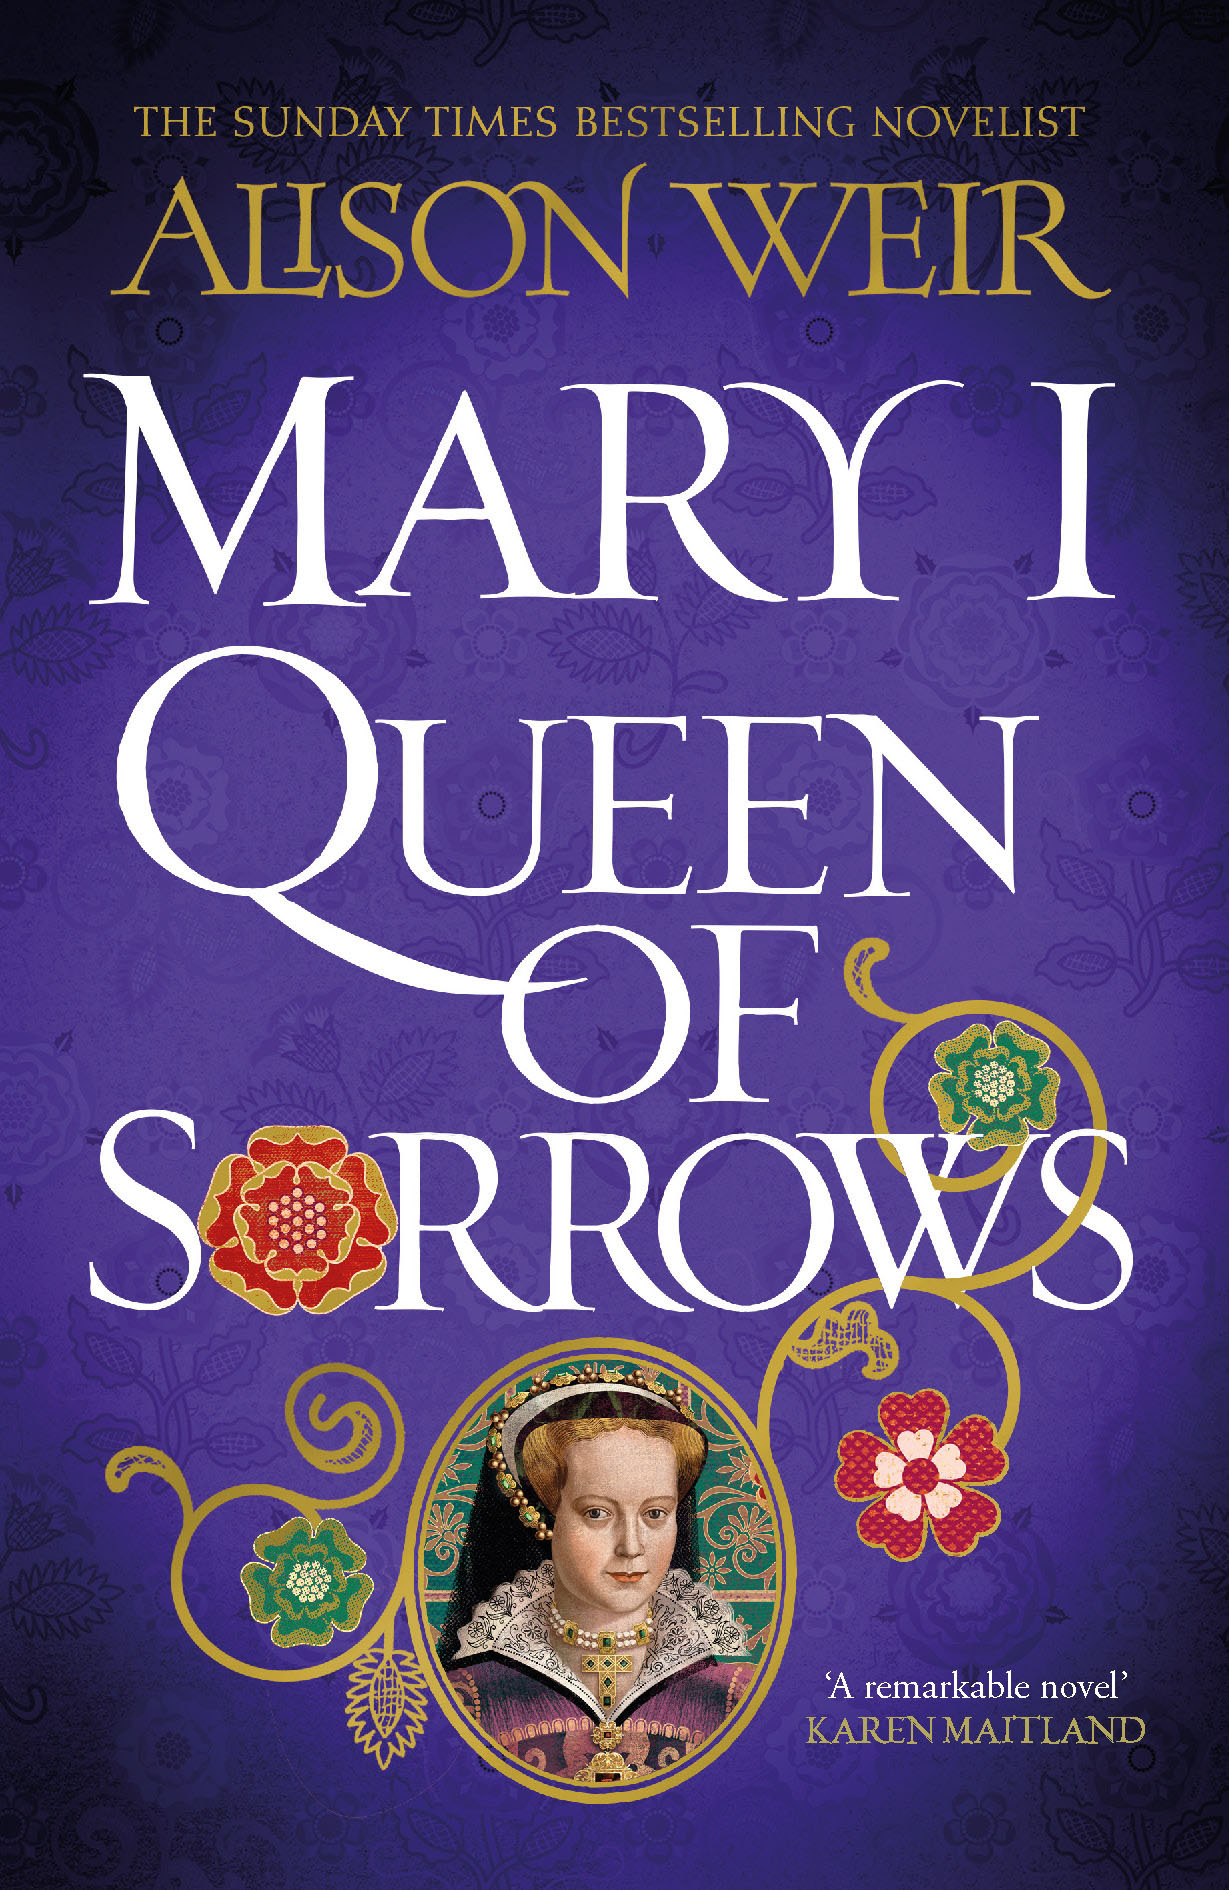 The Is This Mutton book spotlight falls on Alison Weir's new novel Mary I